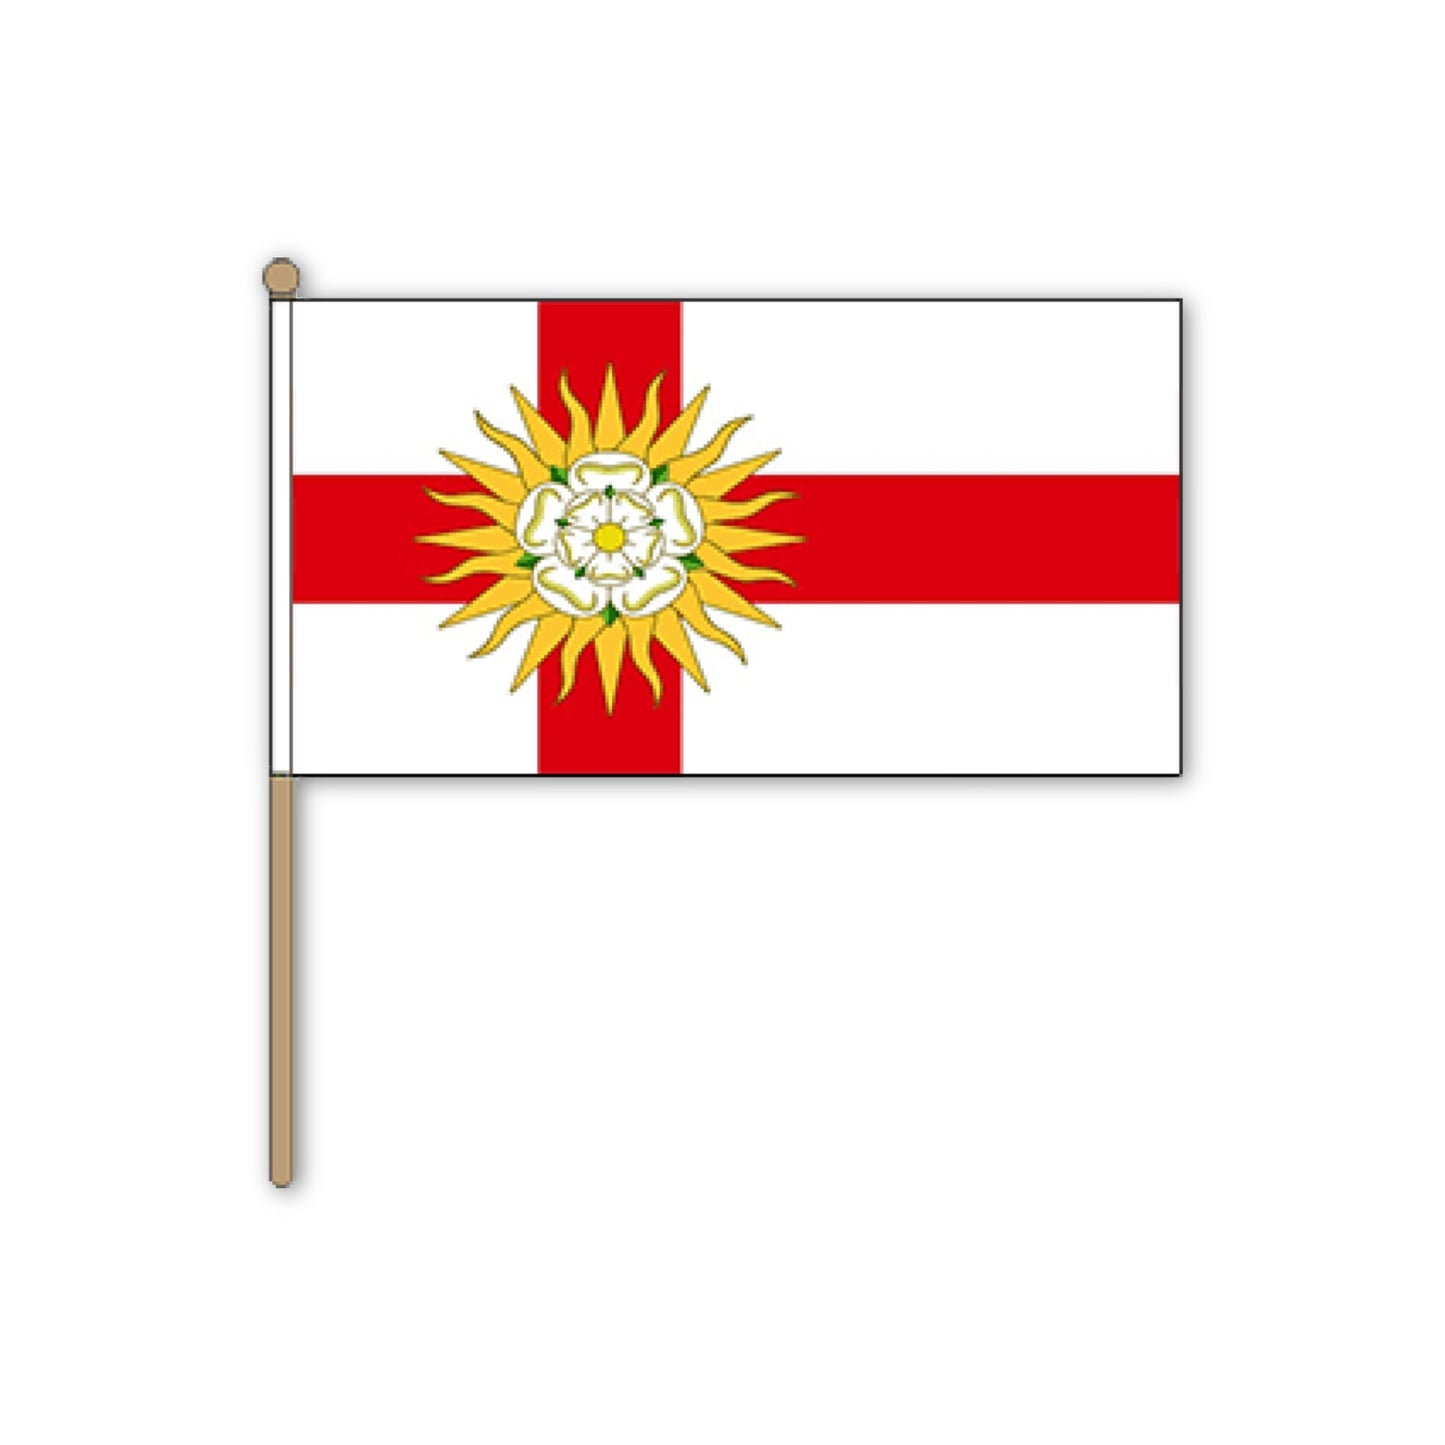 Load image into Gallery viewer, Hand Waving West Riding of Yorkshire Flag - The Great Yorkshire Shop
